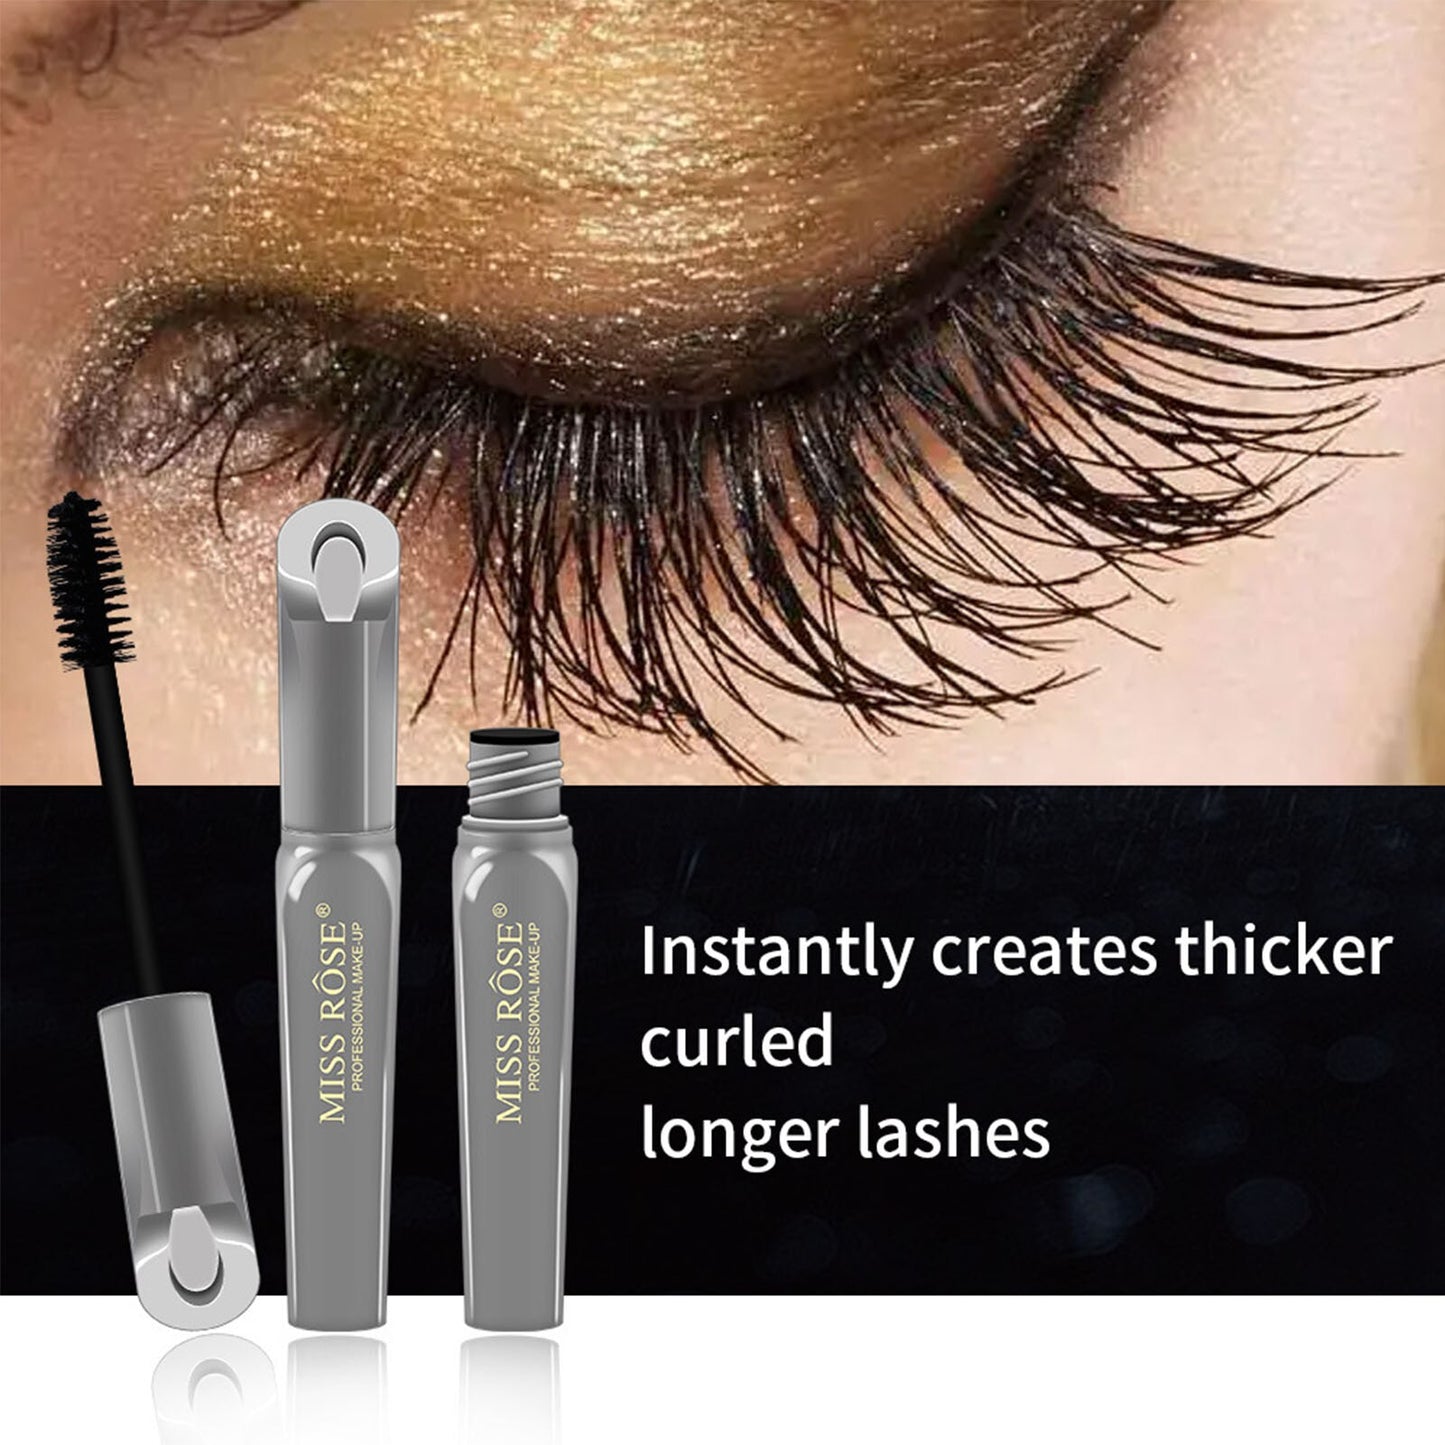 4D Silk Fiber Lashes Mascara Mascara Volume And Length Thickening Curling Lash Makeup For Women And Girls